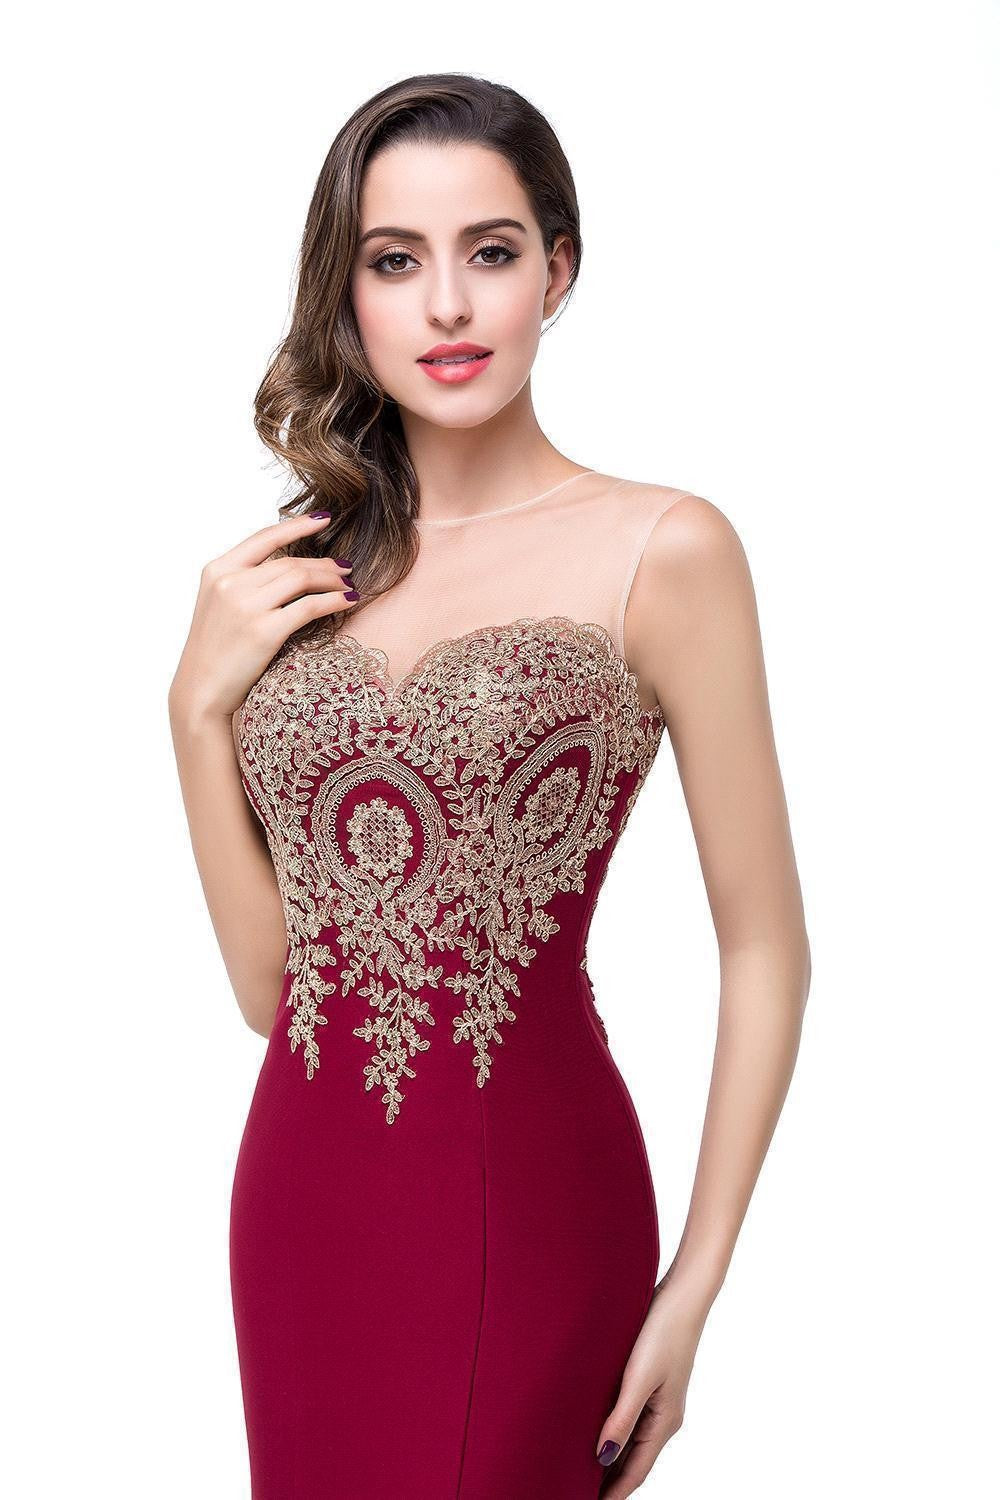 Style 2313 - Gold Applique Mermaid Gown - Available in 11 Colors -